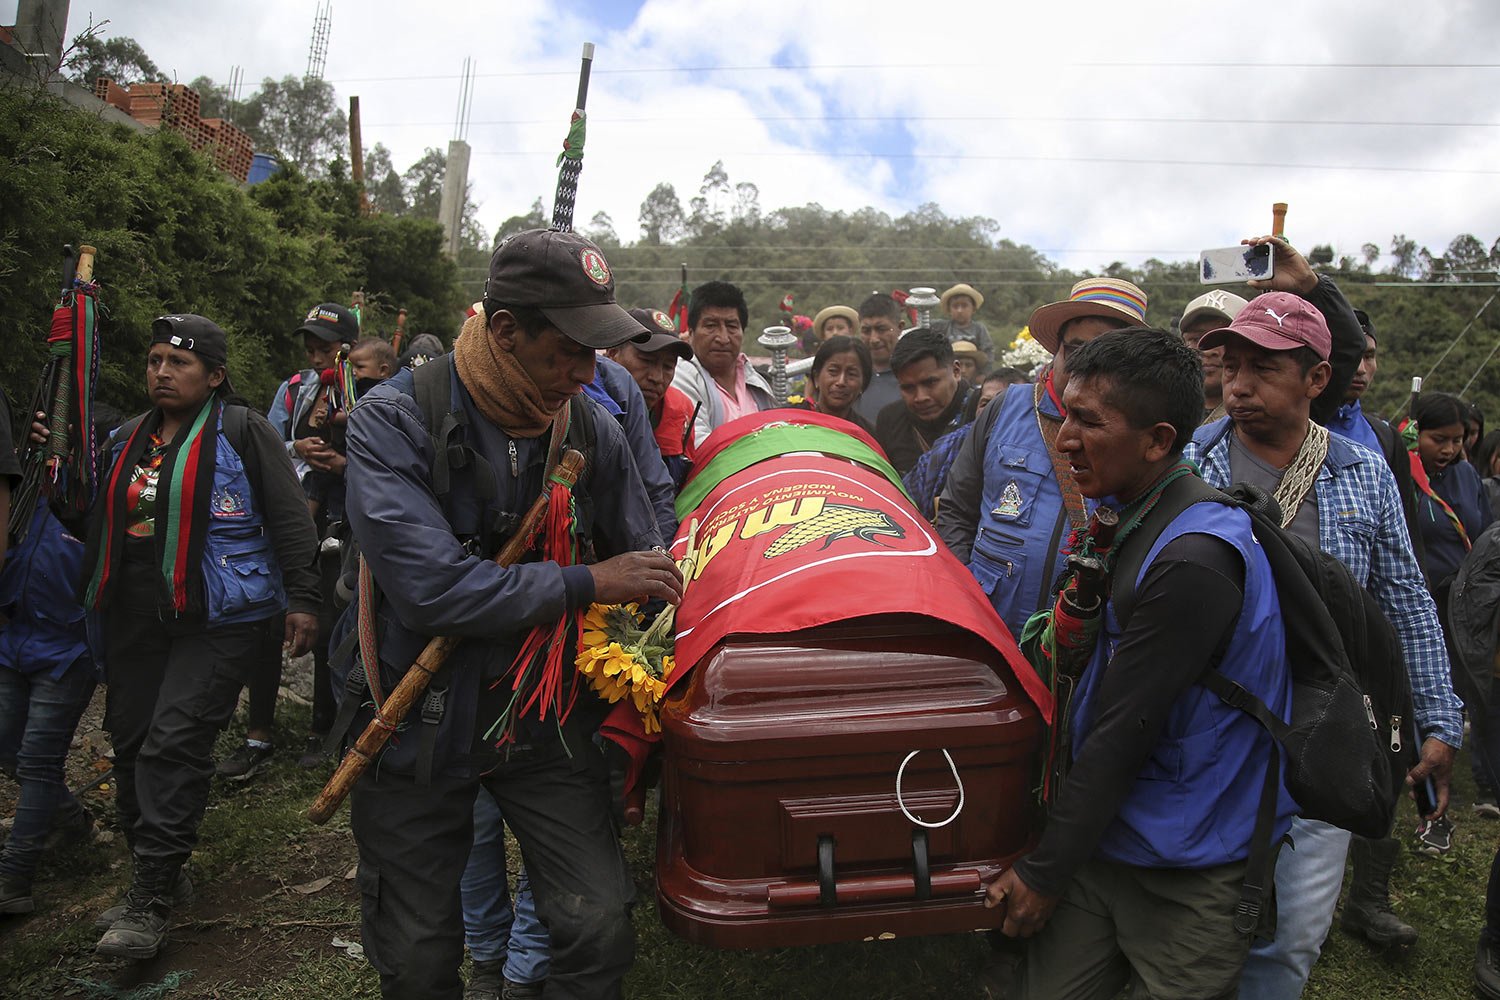  Pallbearers carry the coffin that contain the remains of Indigenous regional leader Fredy Campo Bomba, in Caldono, Colombia, Saturday, July 29, 2023. Campo Bomba was killed by unidentified gunmen on July 26. (AP Photo/Andres Quintero) 